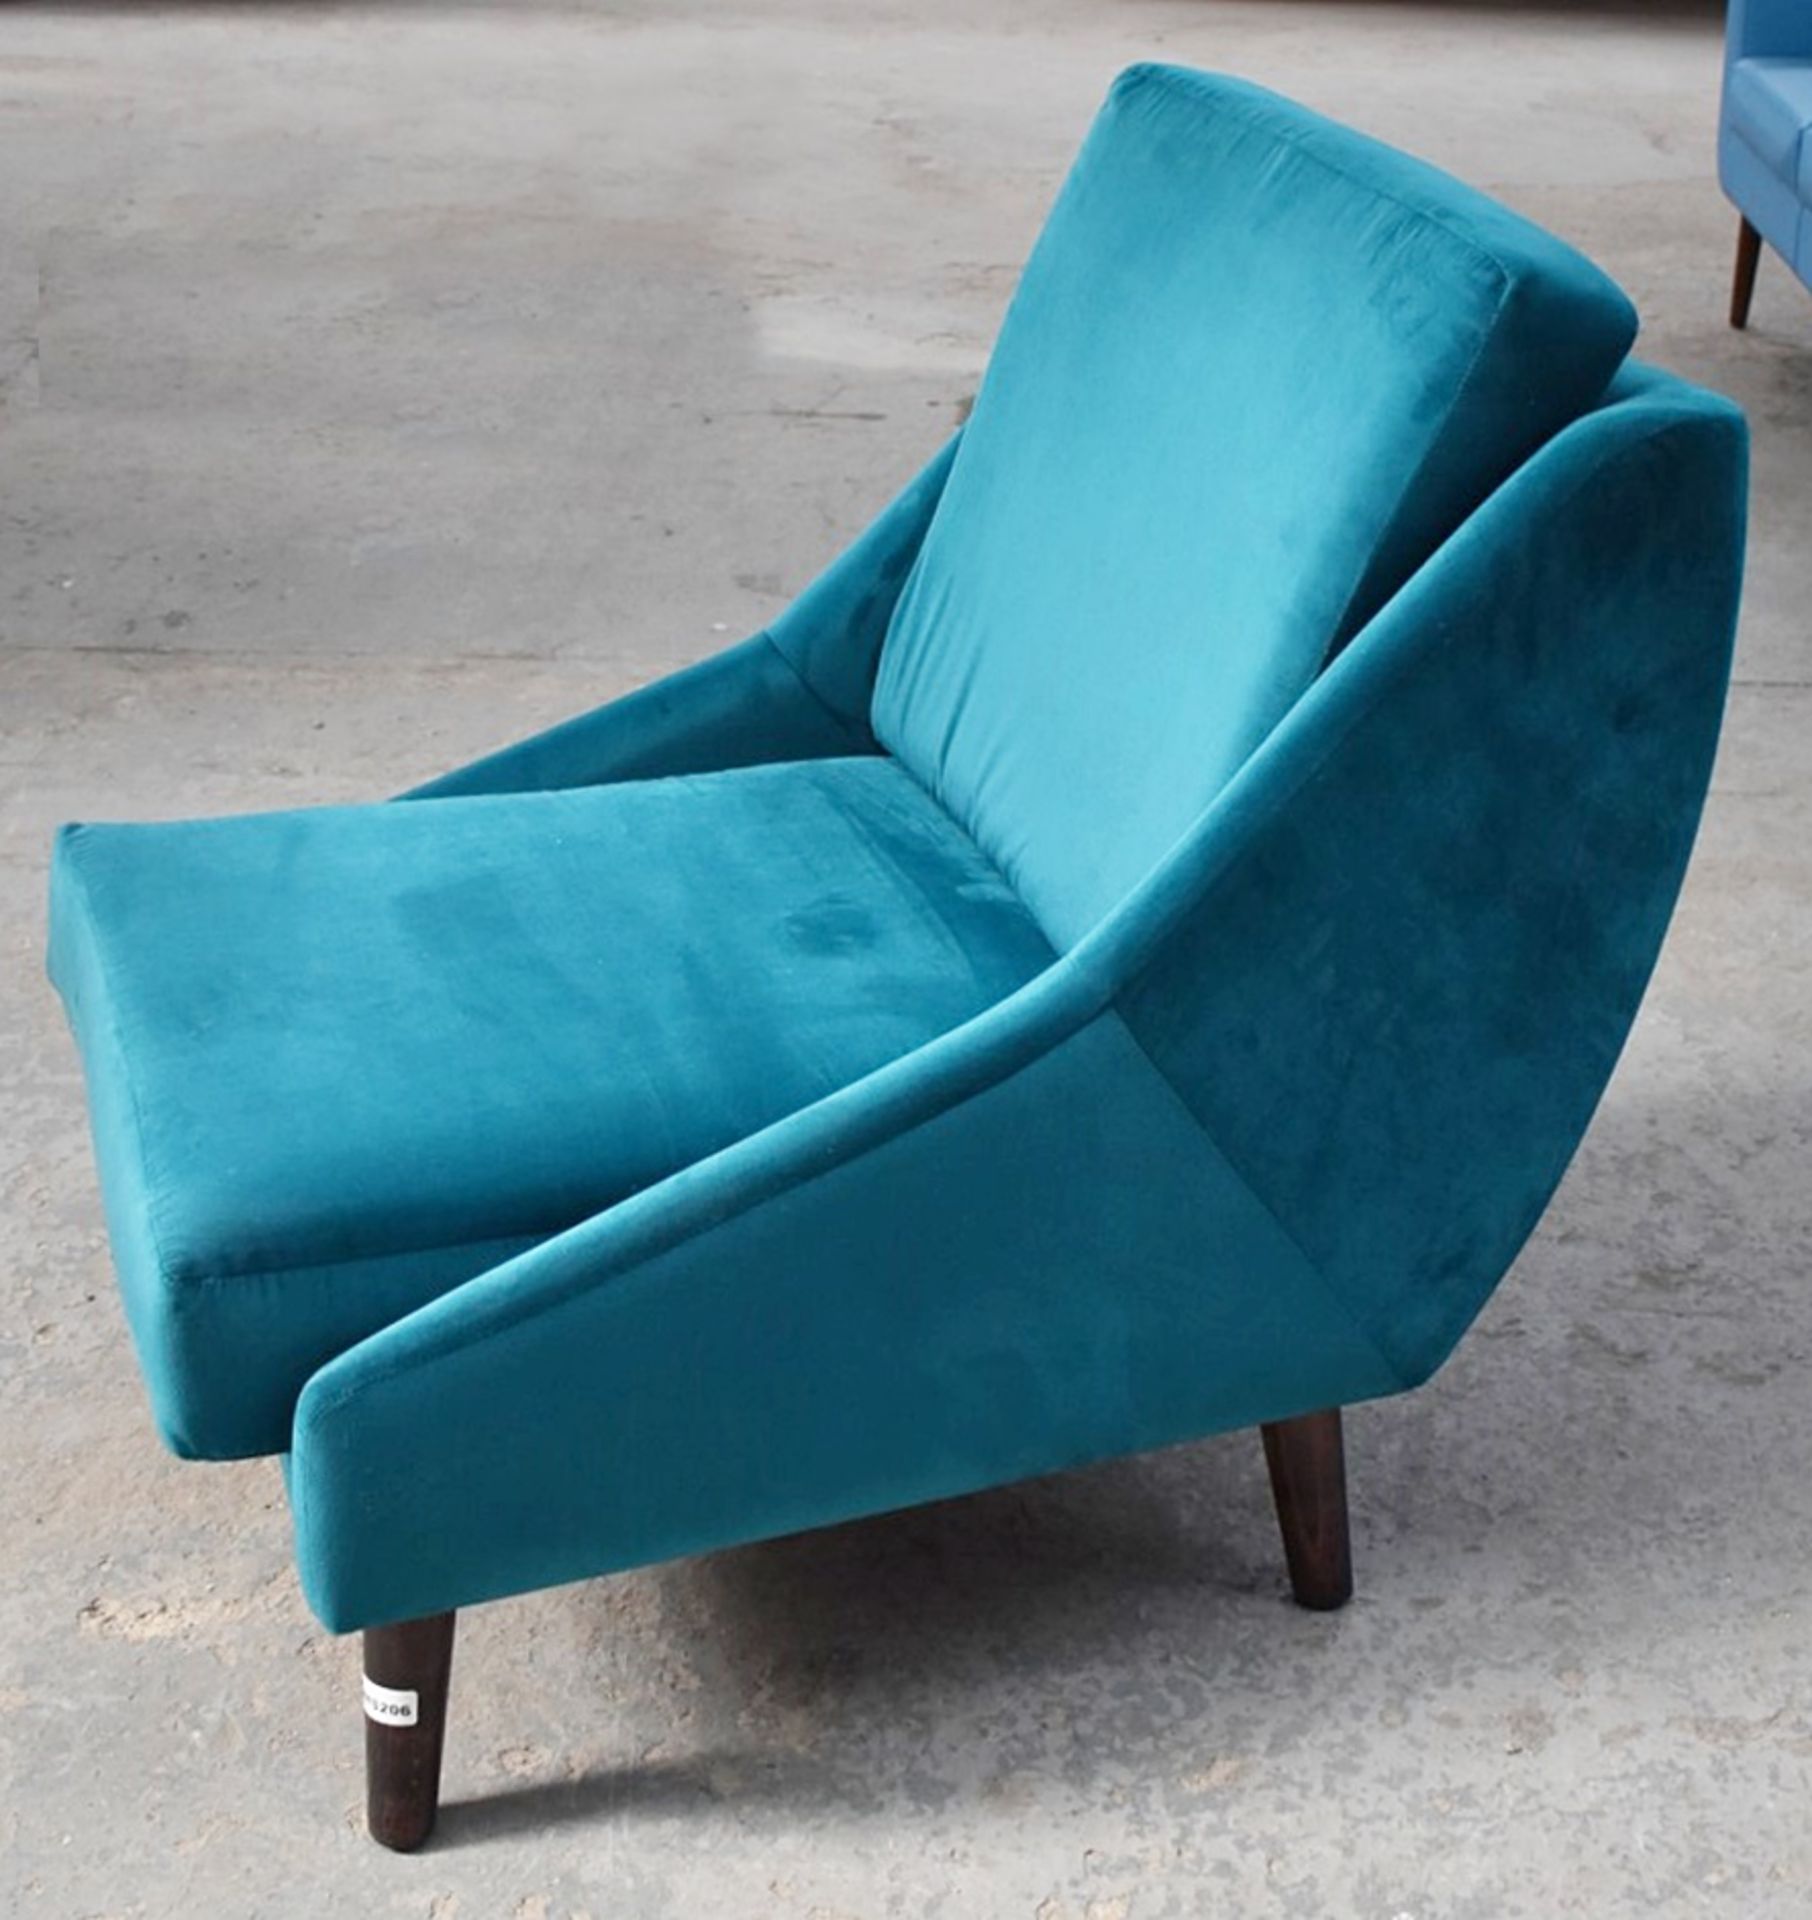 1 x Contemporary Commercial Armchair, Upholstered In A Premium Deep Teal Chenille - Ref: JMS206 - - Image 6 of 6